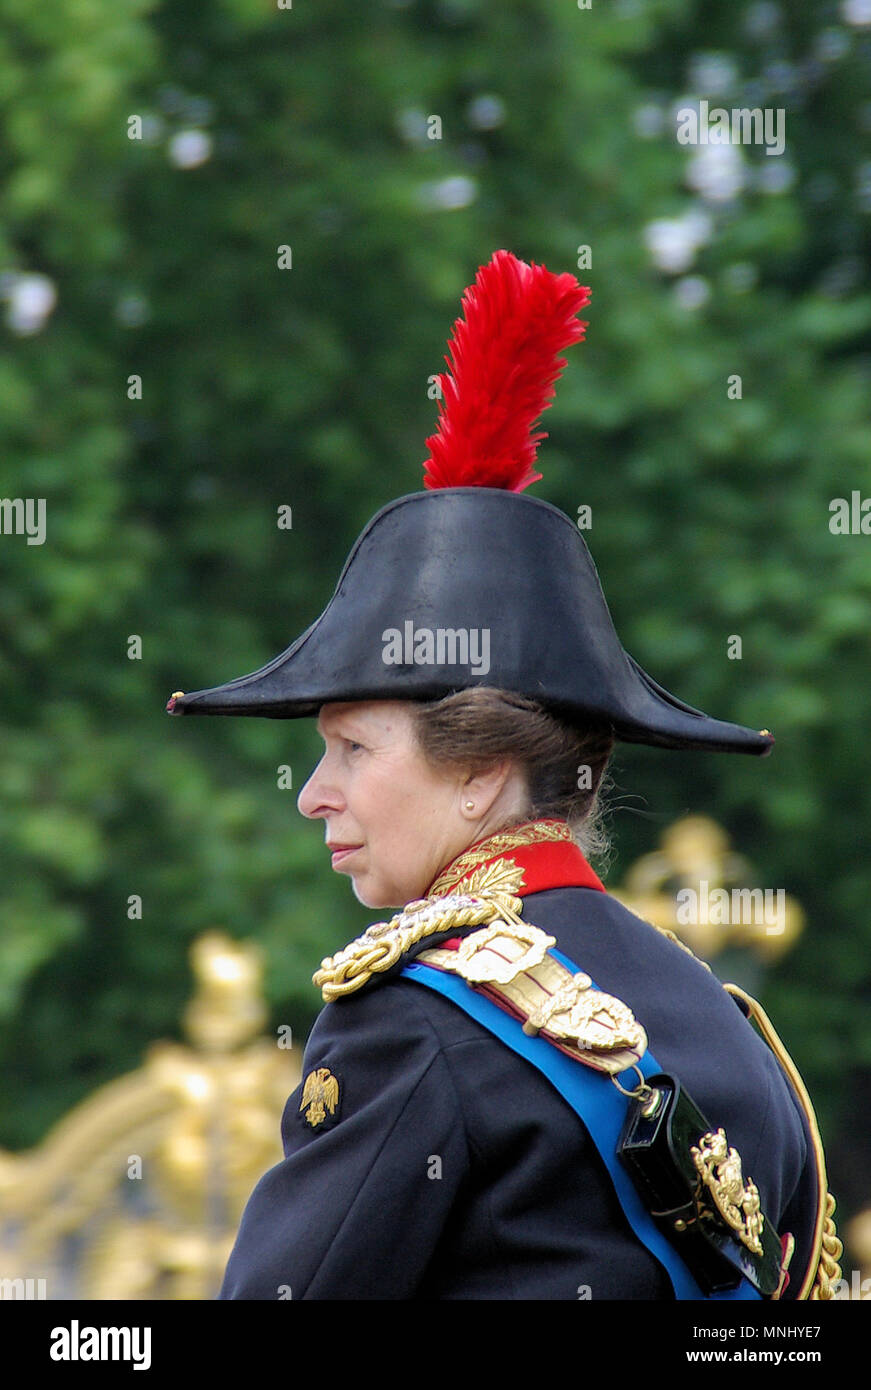 Princess Anne. Anne, Princess Royal in military ceremonial uniform during Trooping the Colour, London, England, UK Stock Photo